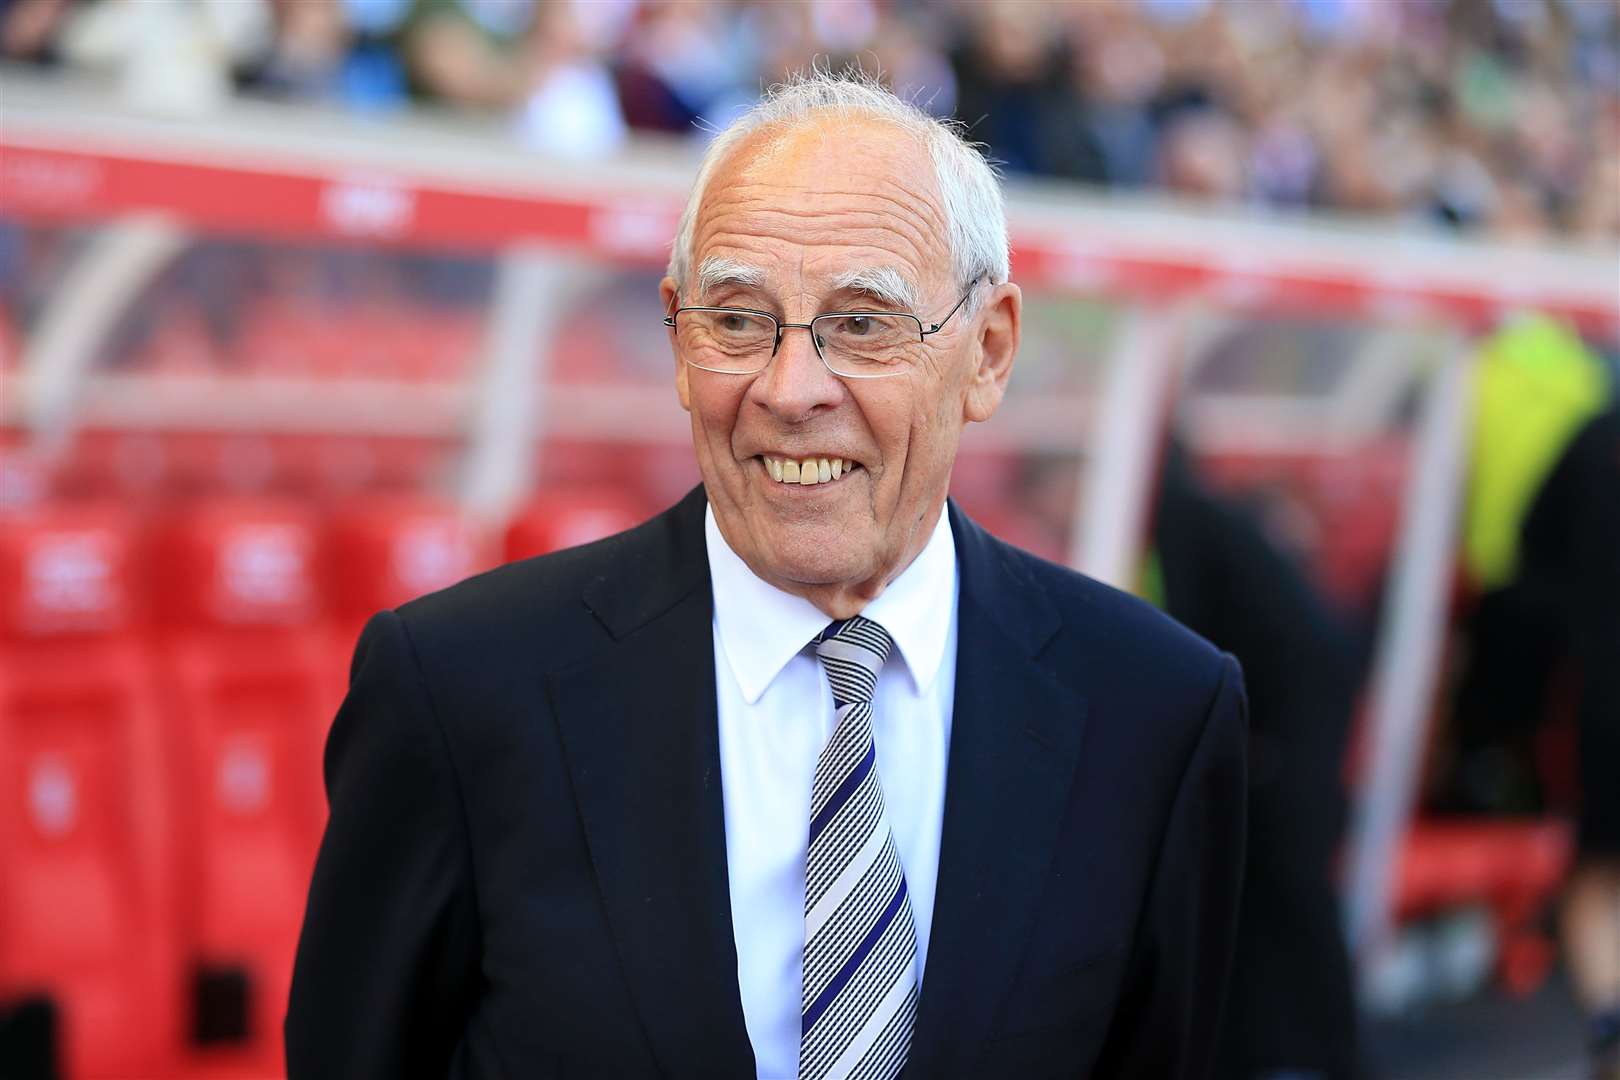 Stoke City chairman Peter Coates made his fortune founding the gambling firm Bet365 (Nigel French/PA)